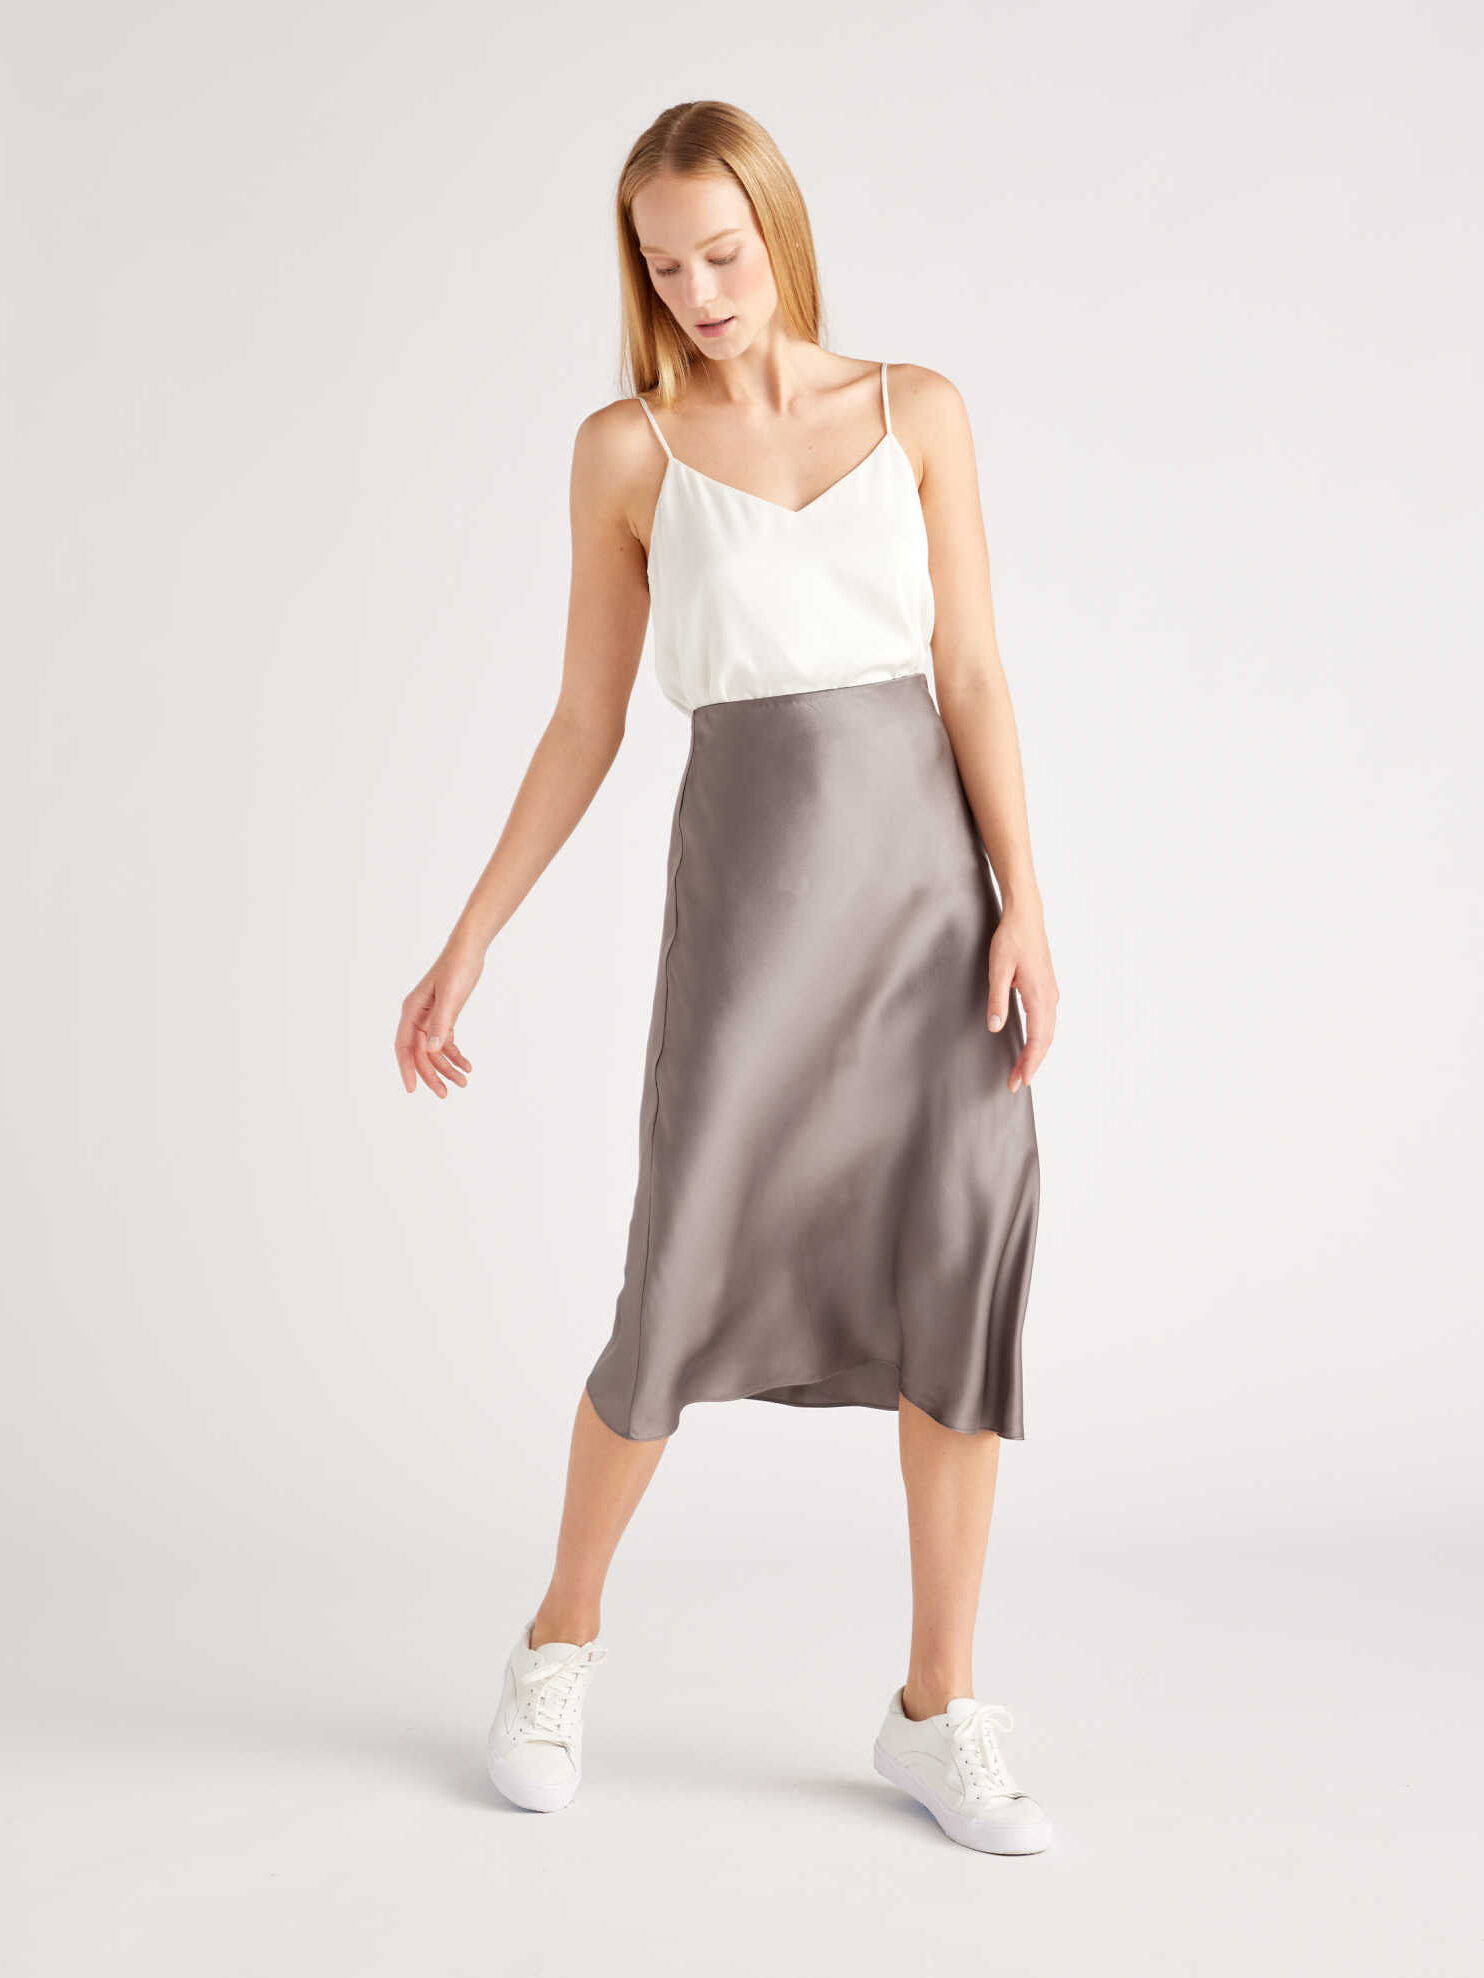 A woman modeling a white camisole top with a satin midi skirt and white sneakers.